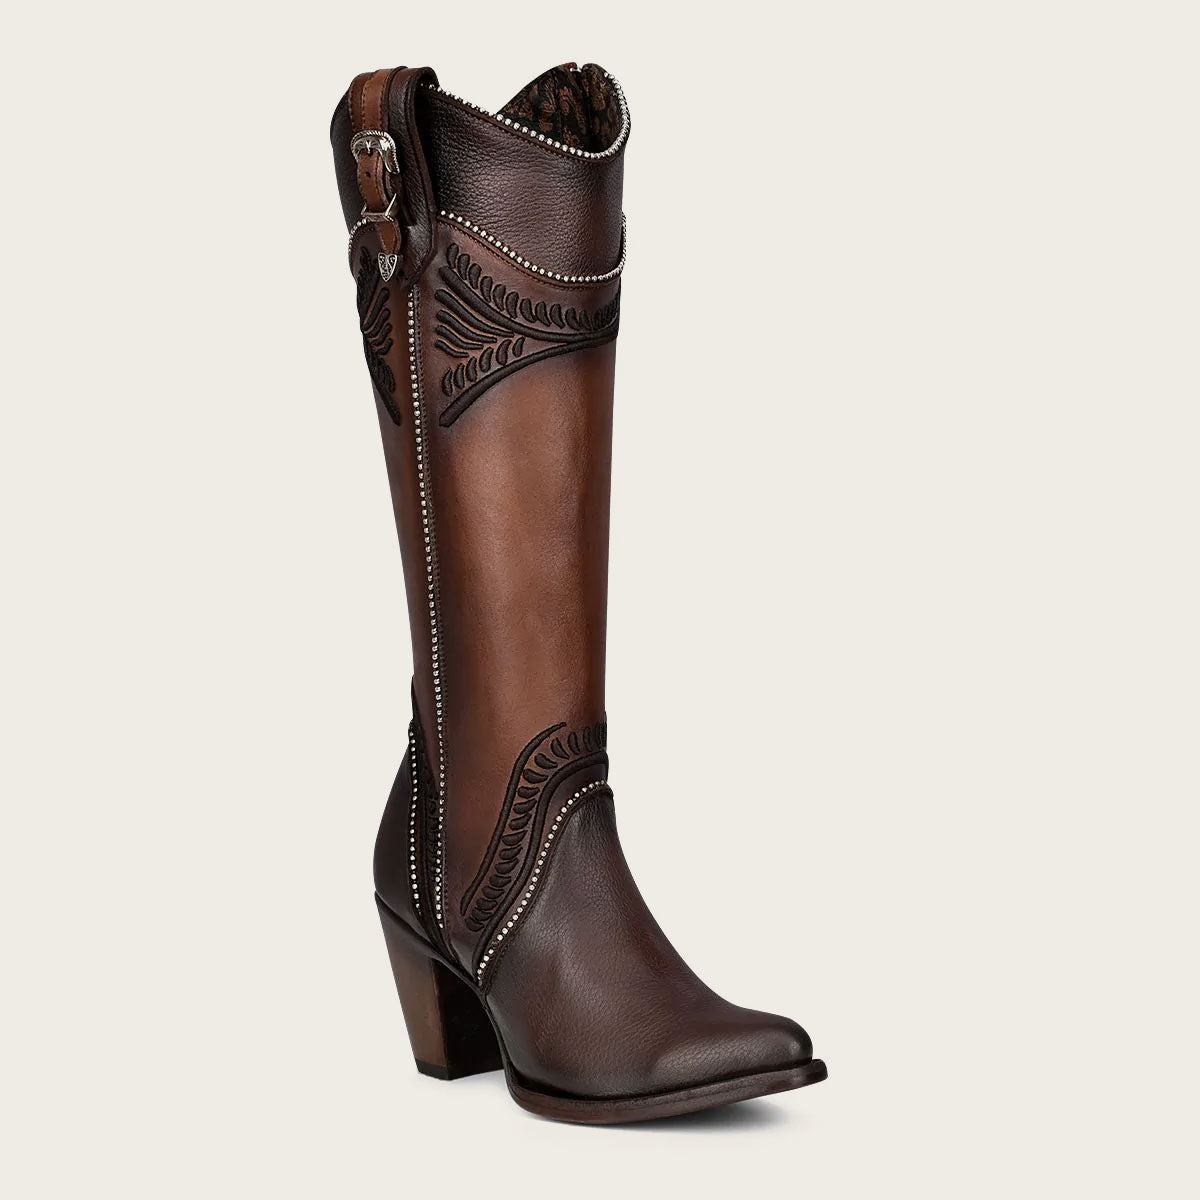 Buckles leather boots - Women